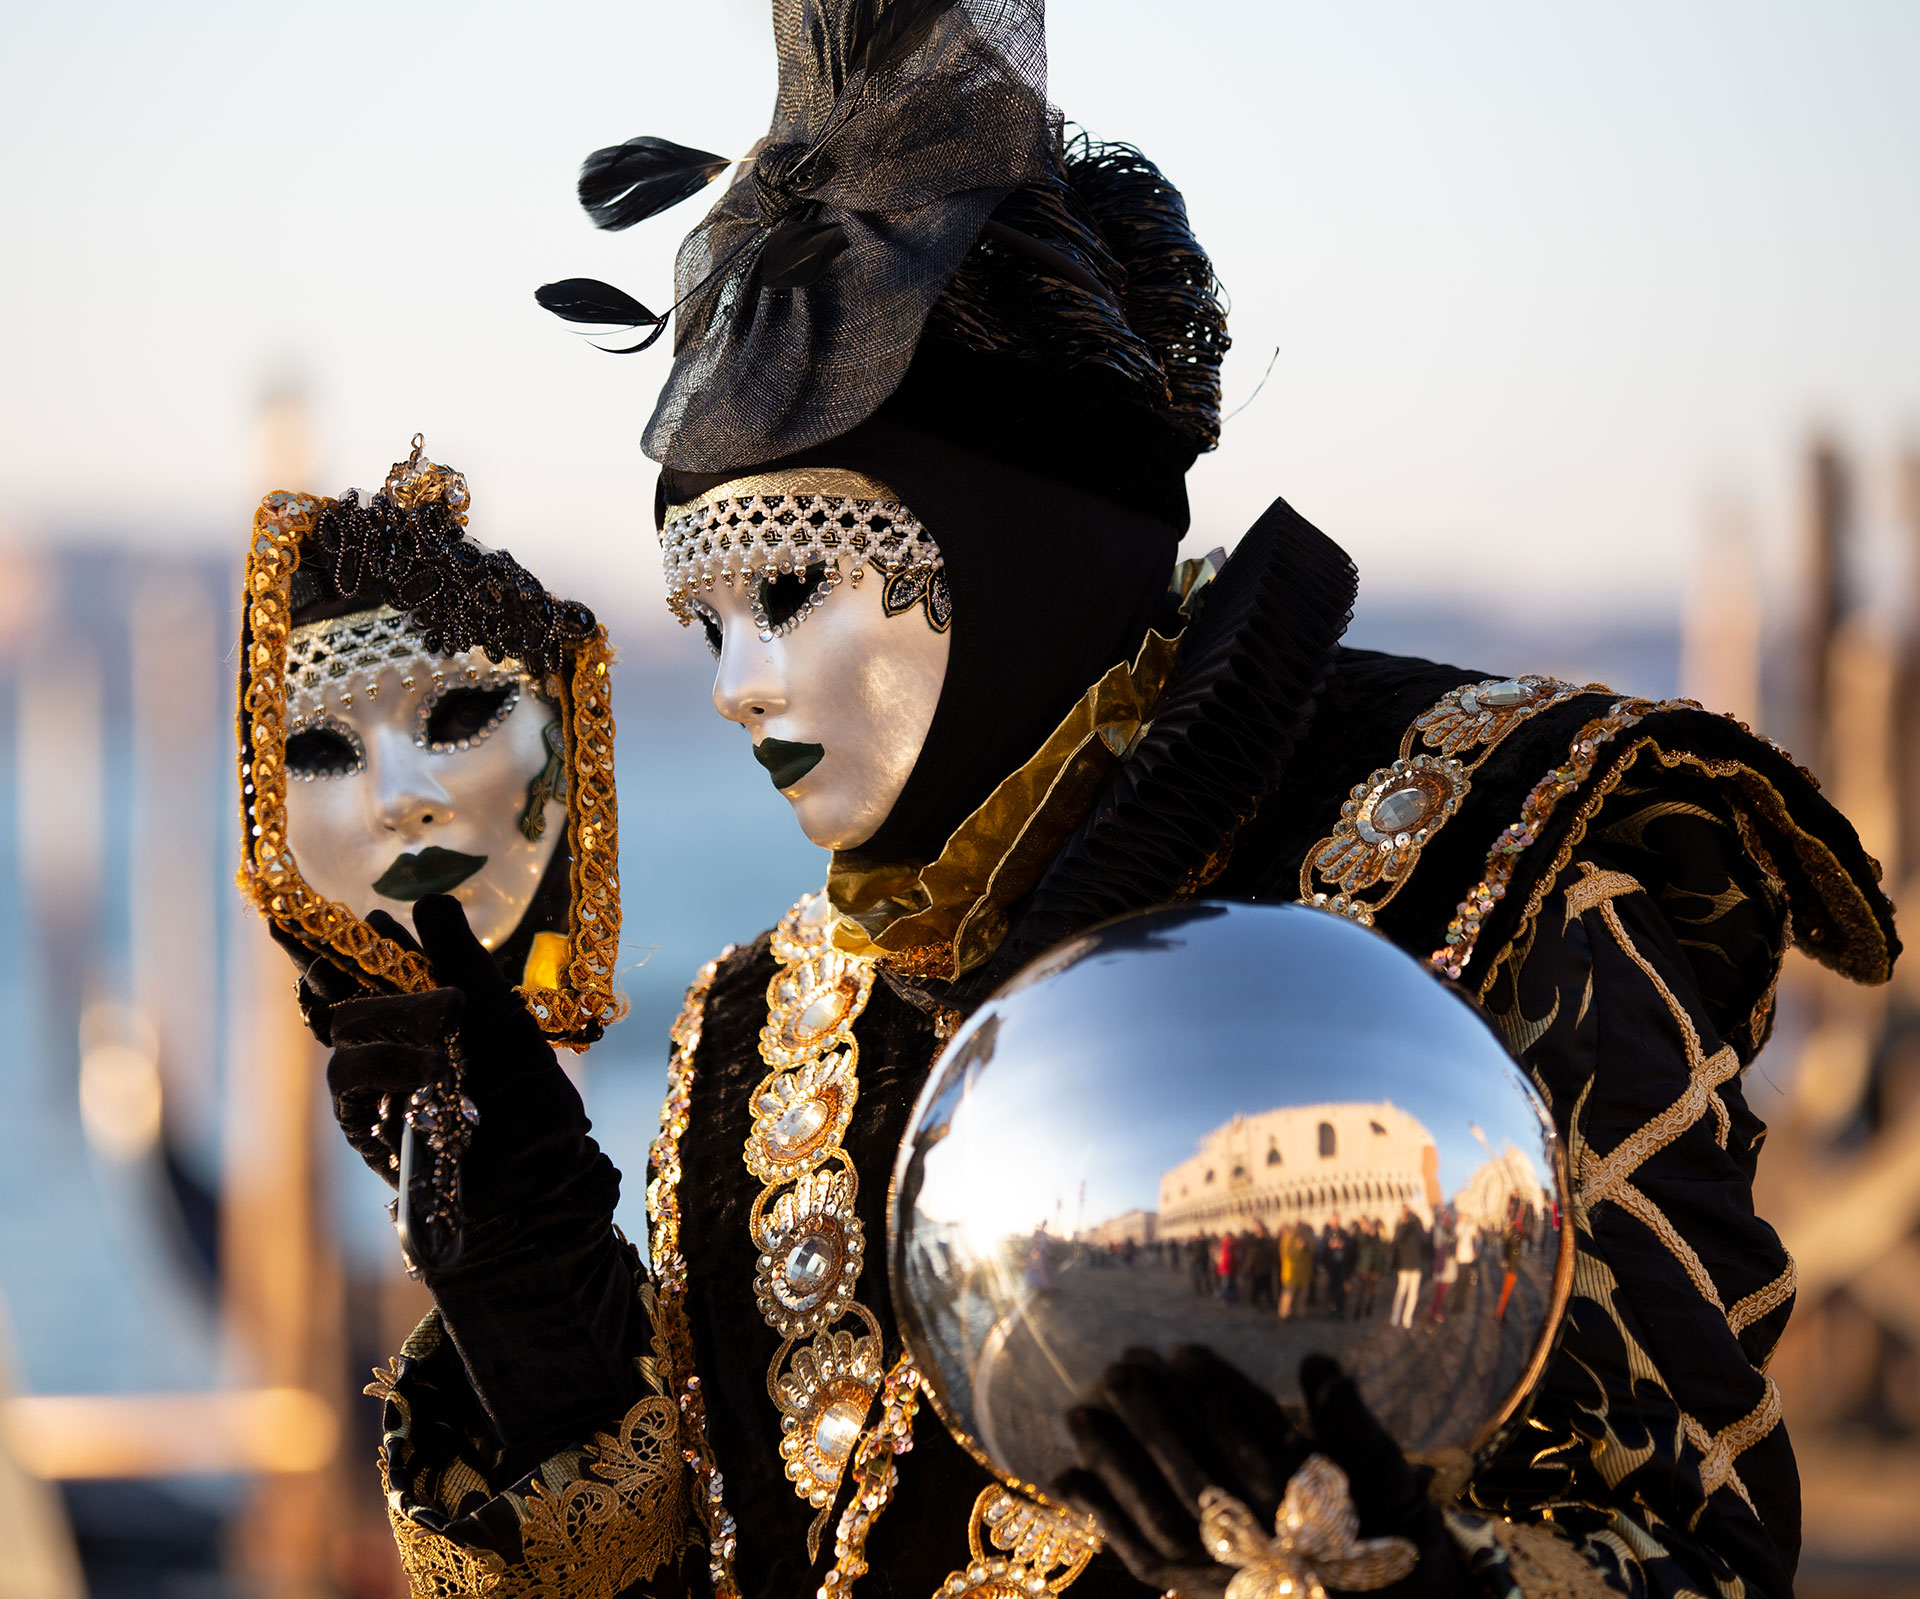 A reveller wearing a mask and a period costume takes part in the Venice Carnival on February 16, 2020-Laura Venezia